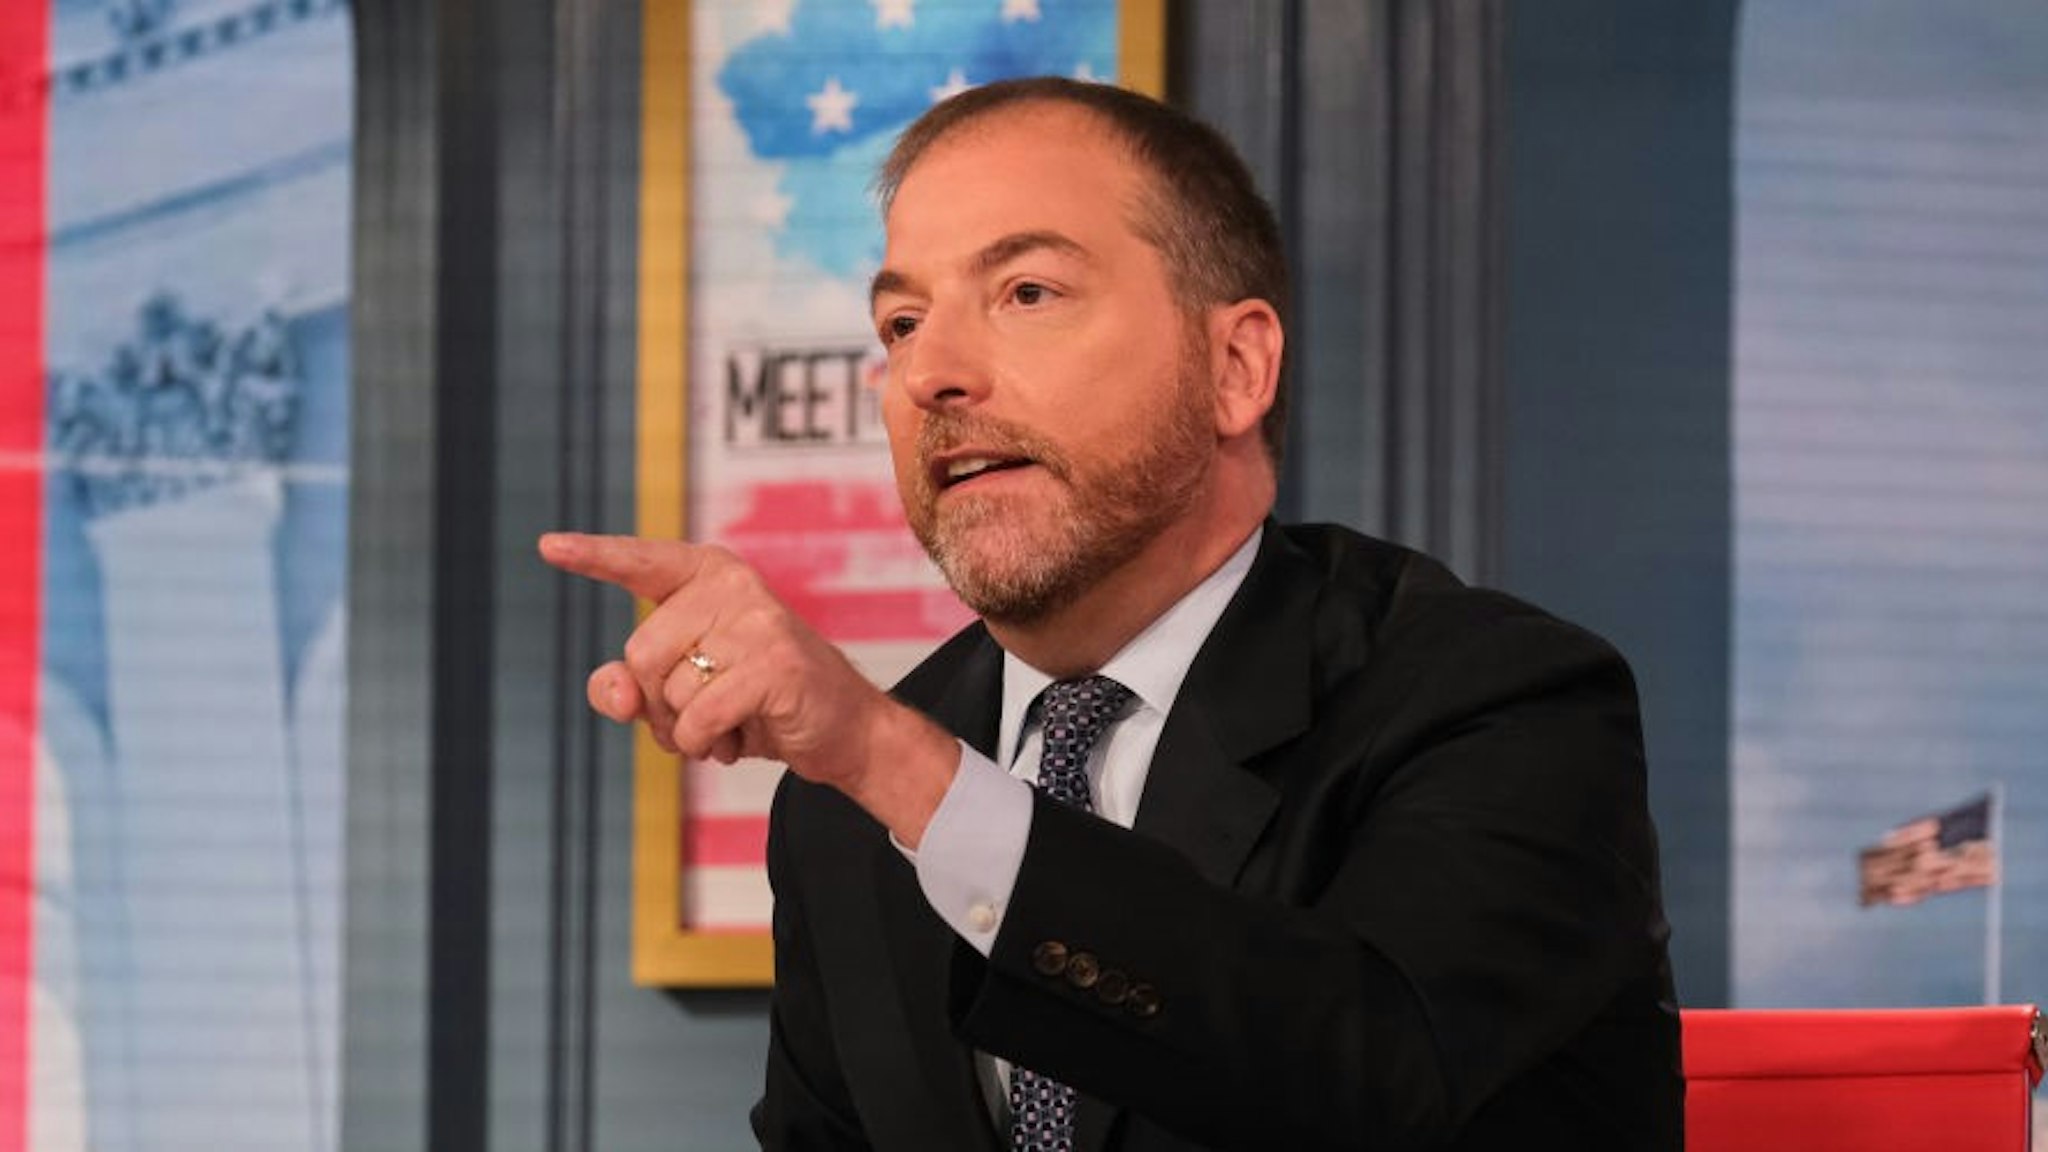 MEET THE PRESS -- Pictured: (l-r) Moderator Chuck Todd appears on Meet the Press" in Washington, D.C., Sunday, September 26, 2021. (Photo by: